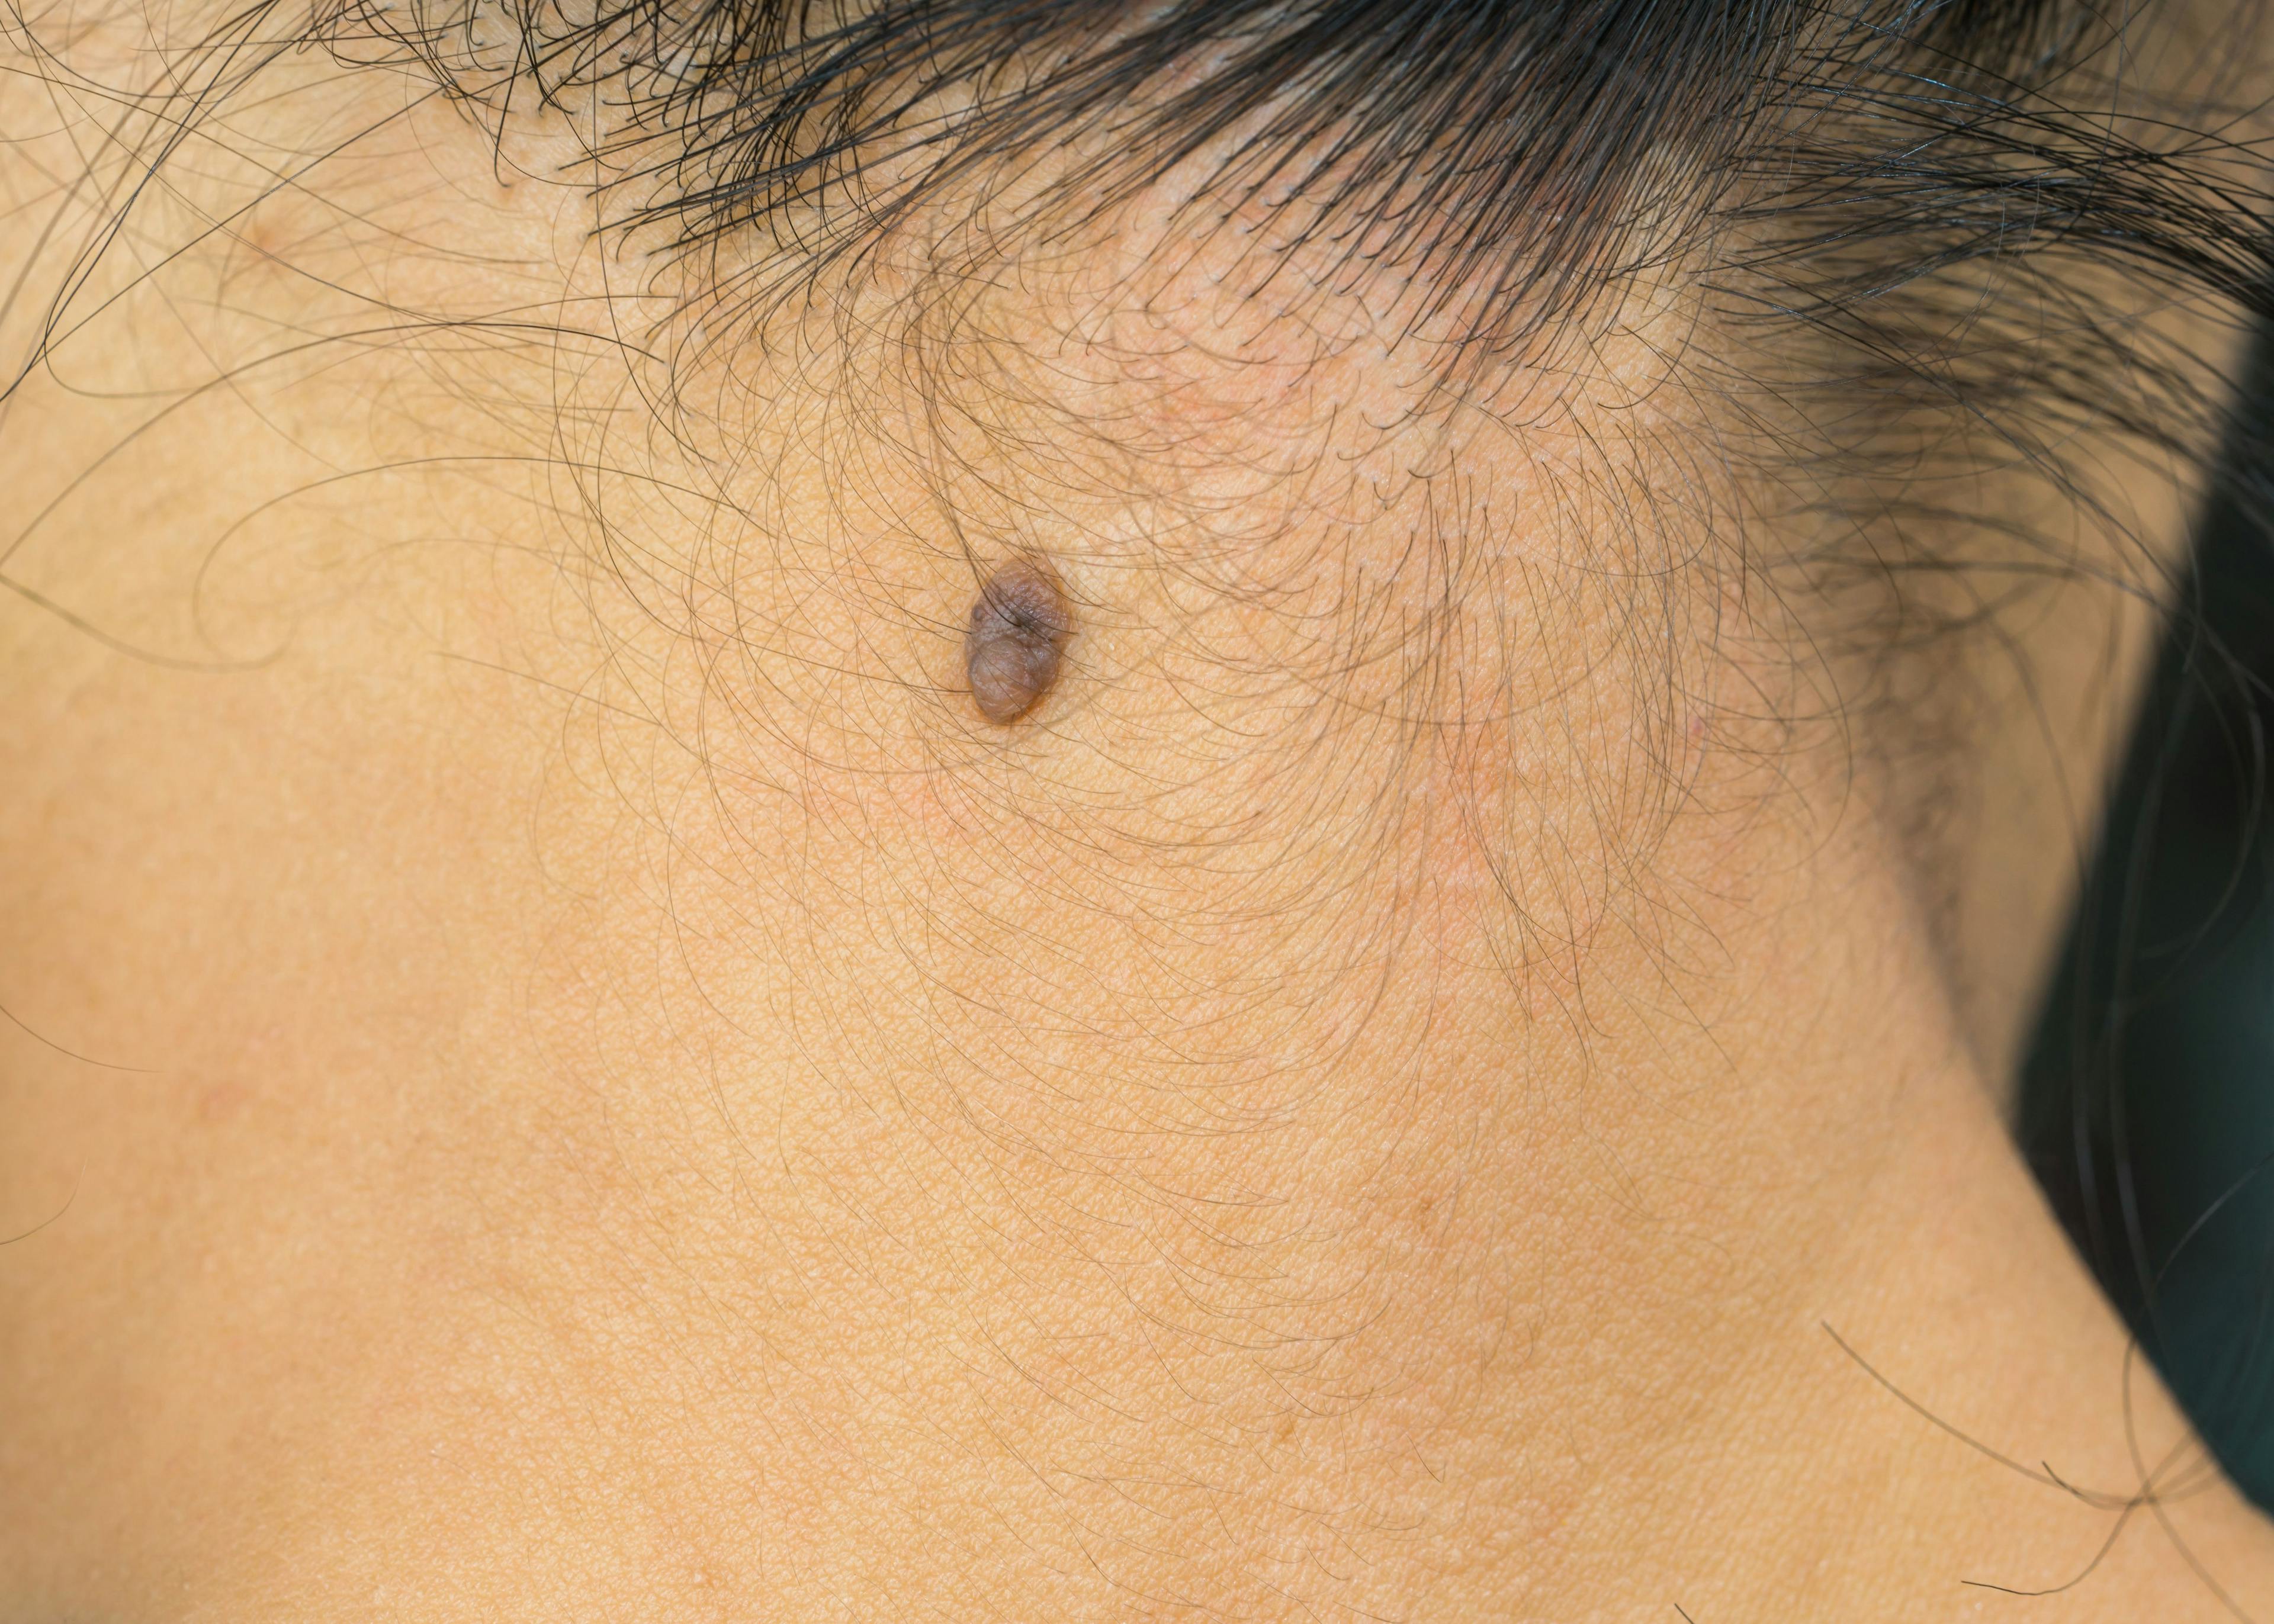 Asian American and Pacific Islander Patients Face Increased Odds of Melanoma Treatment Delay